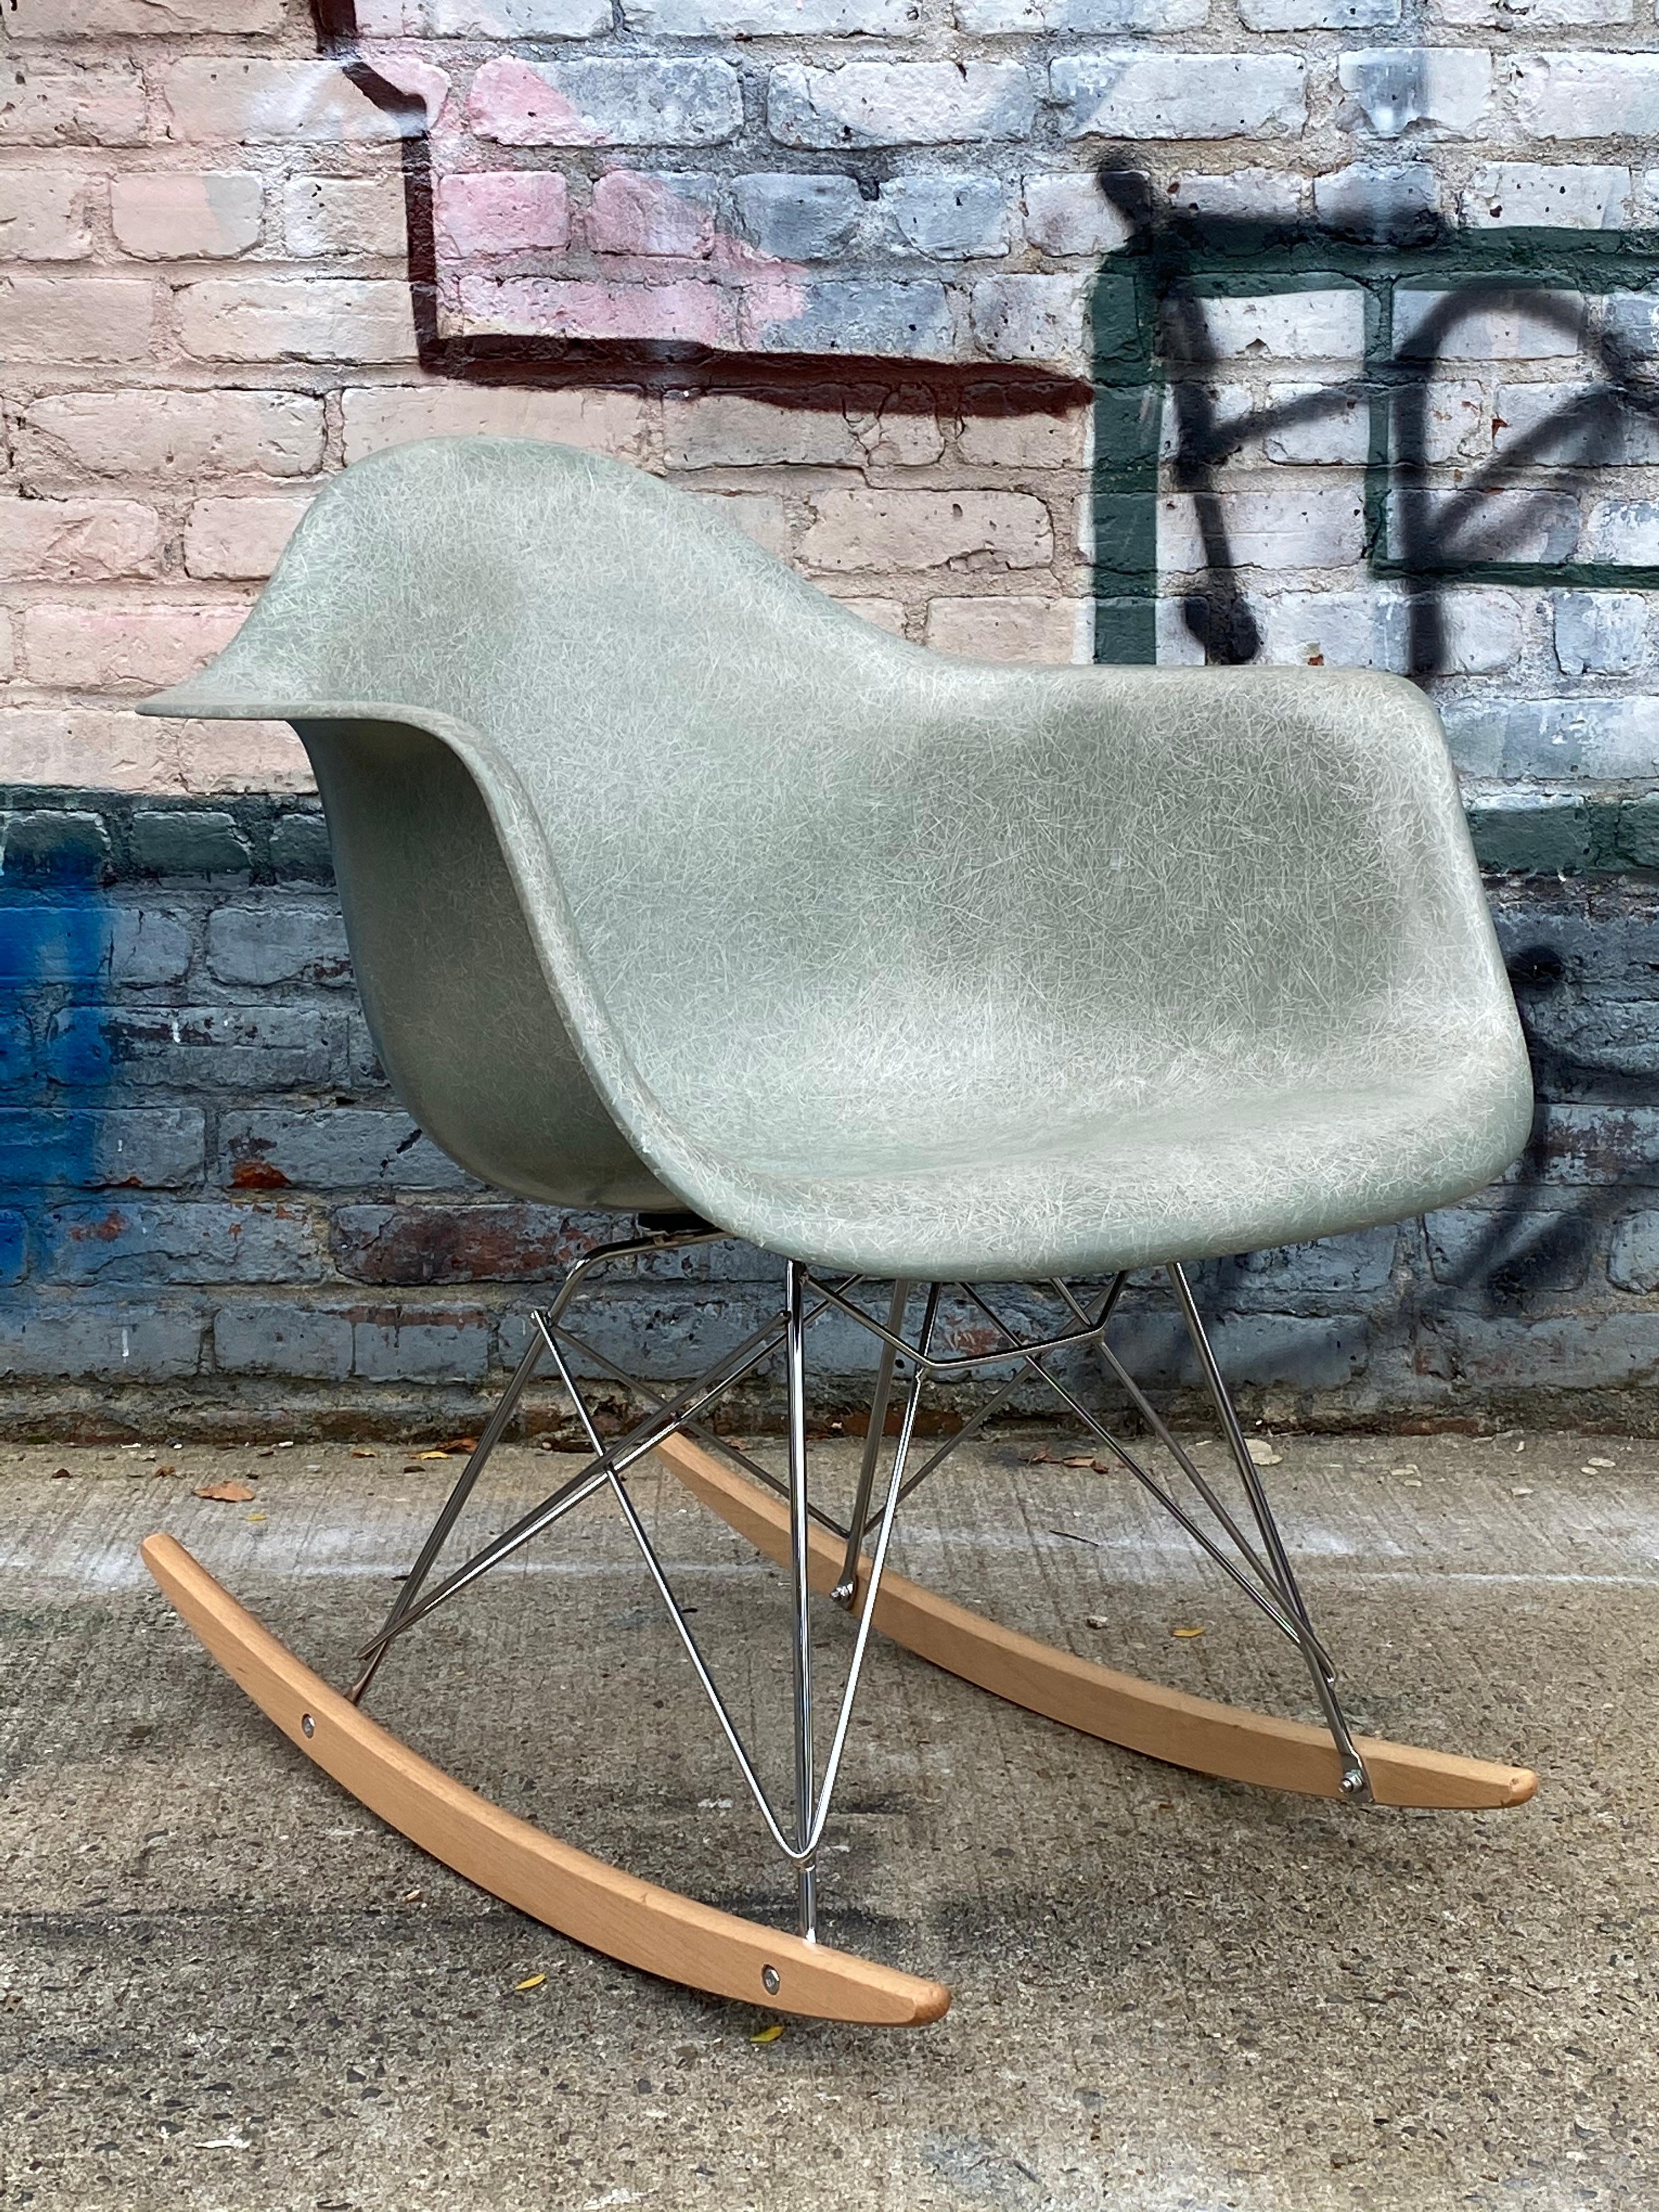 Very early shell, dating to mid-late 1960s production. Highly coveted and hard to find Seafoam green. On new rocker base, no cracks to the shell. Normal wear, retains Herman Miller label.